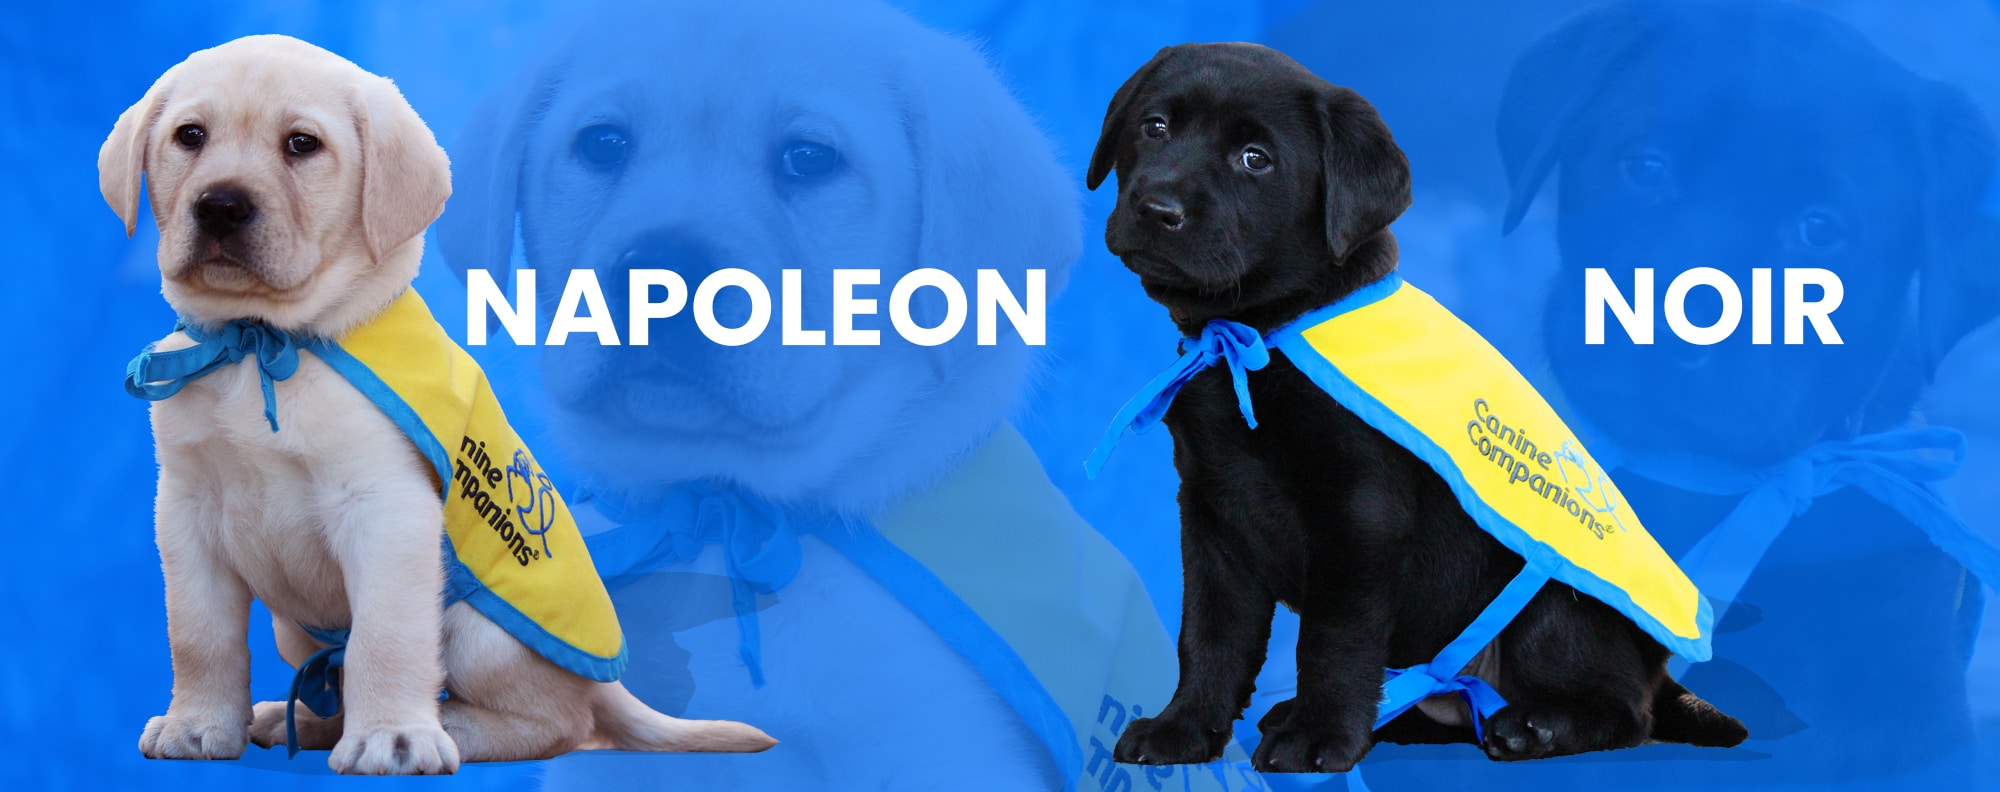 banner with two puppies and text that says napoleon and noir